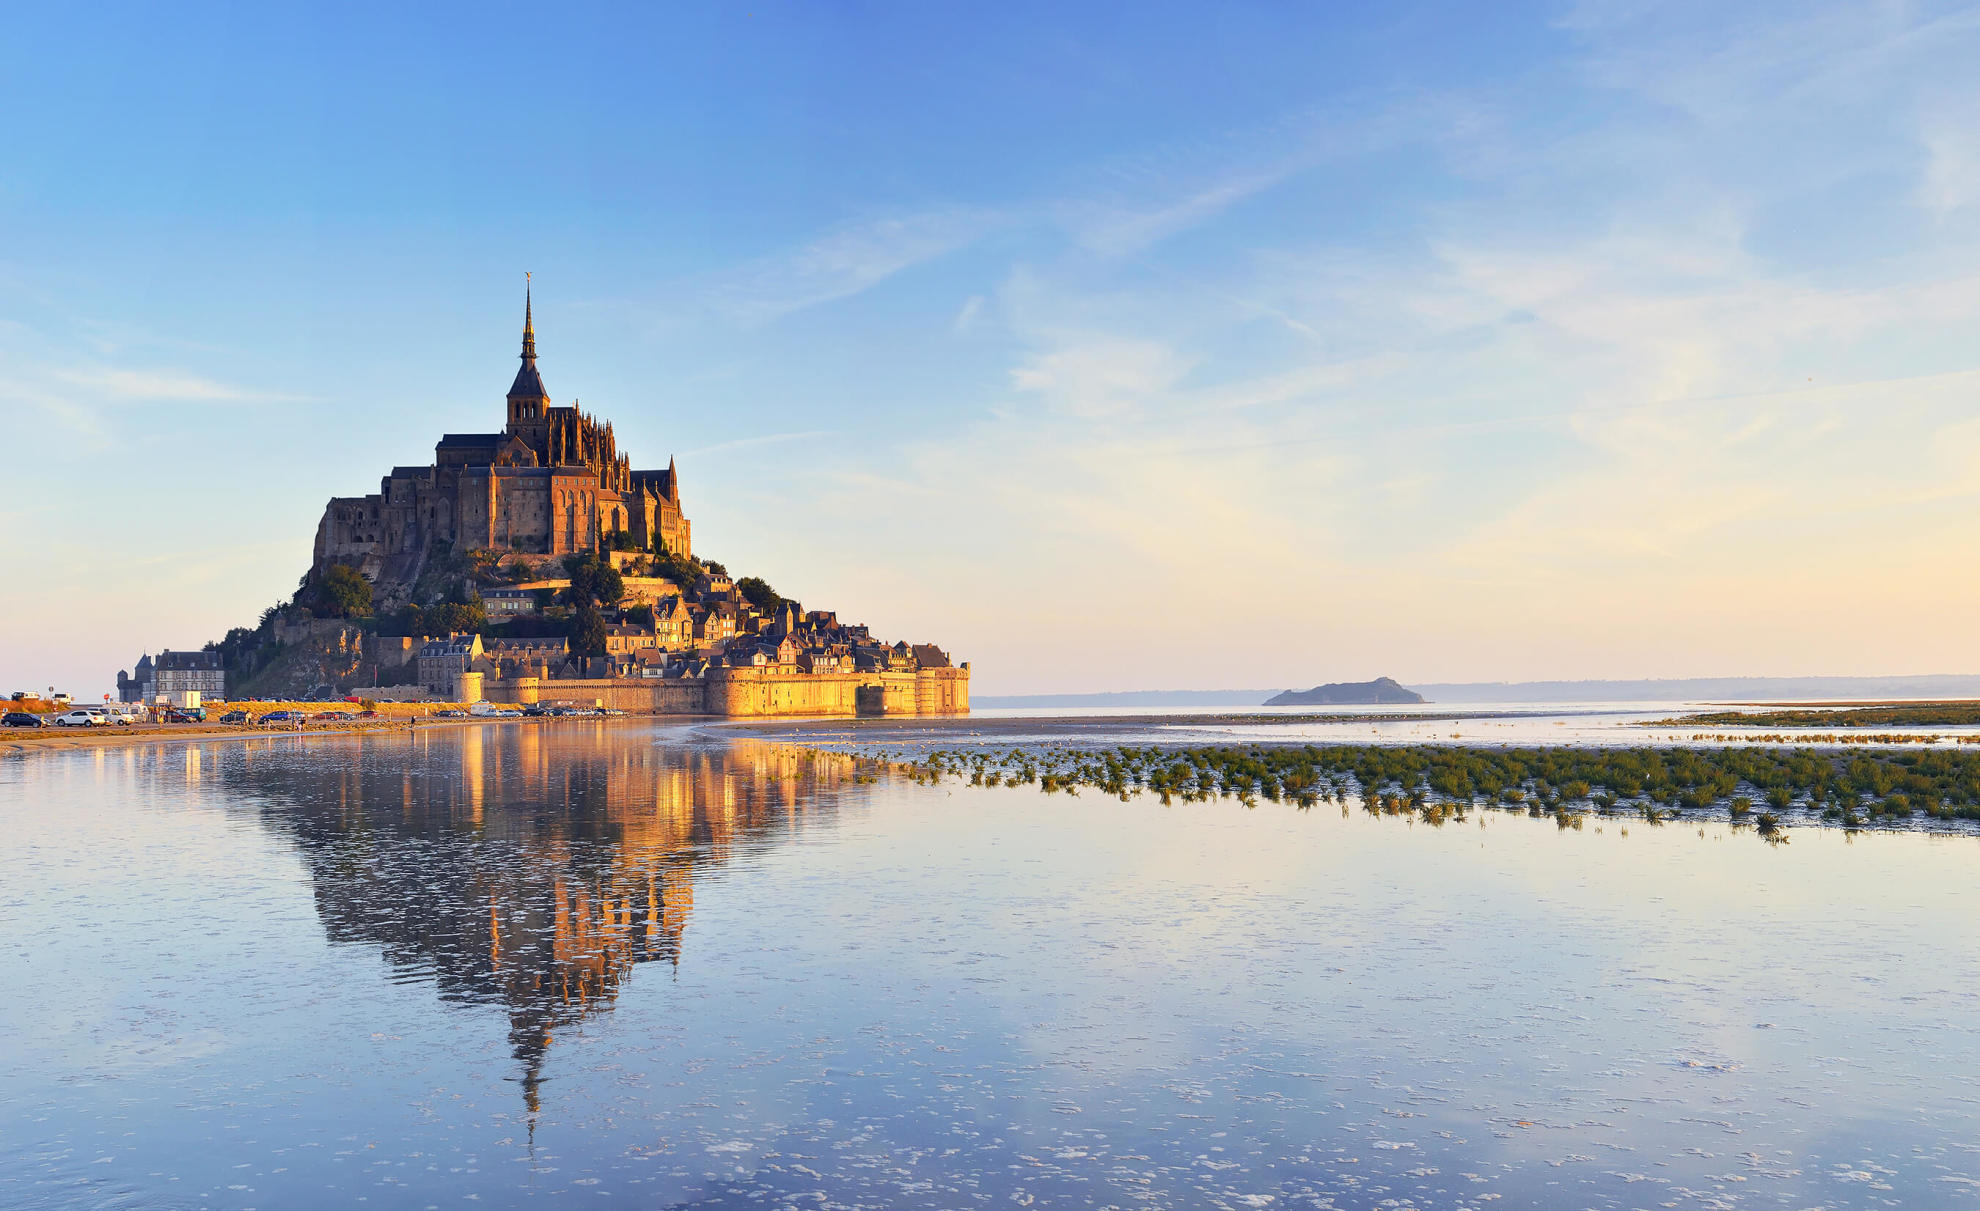 The Mont Saint Michel is one of France's most stunning sights